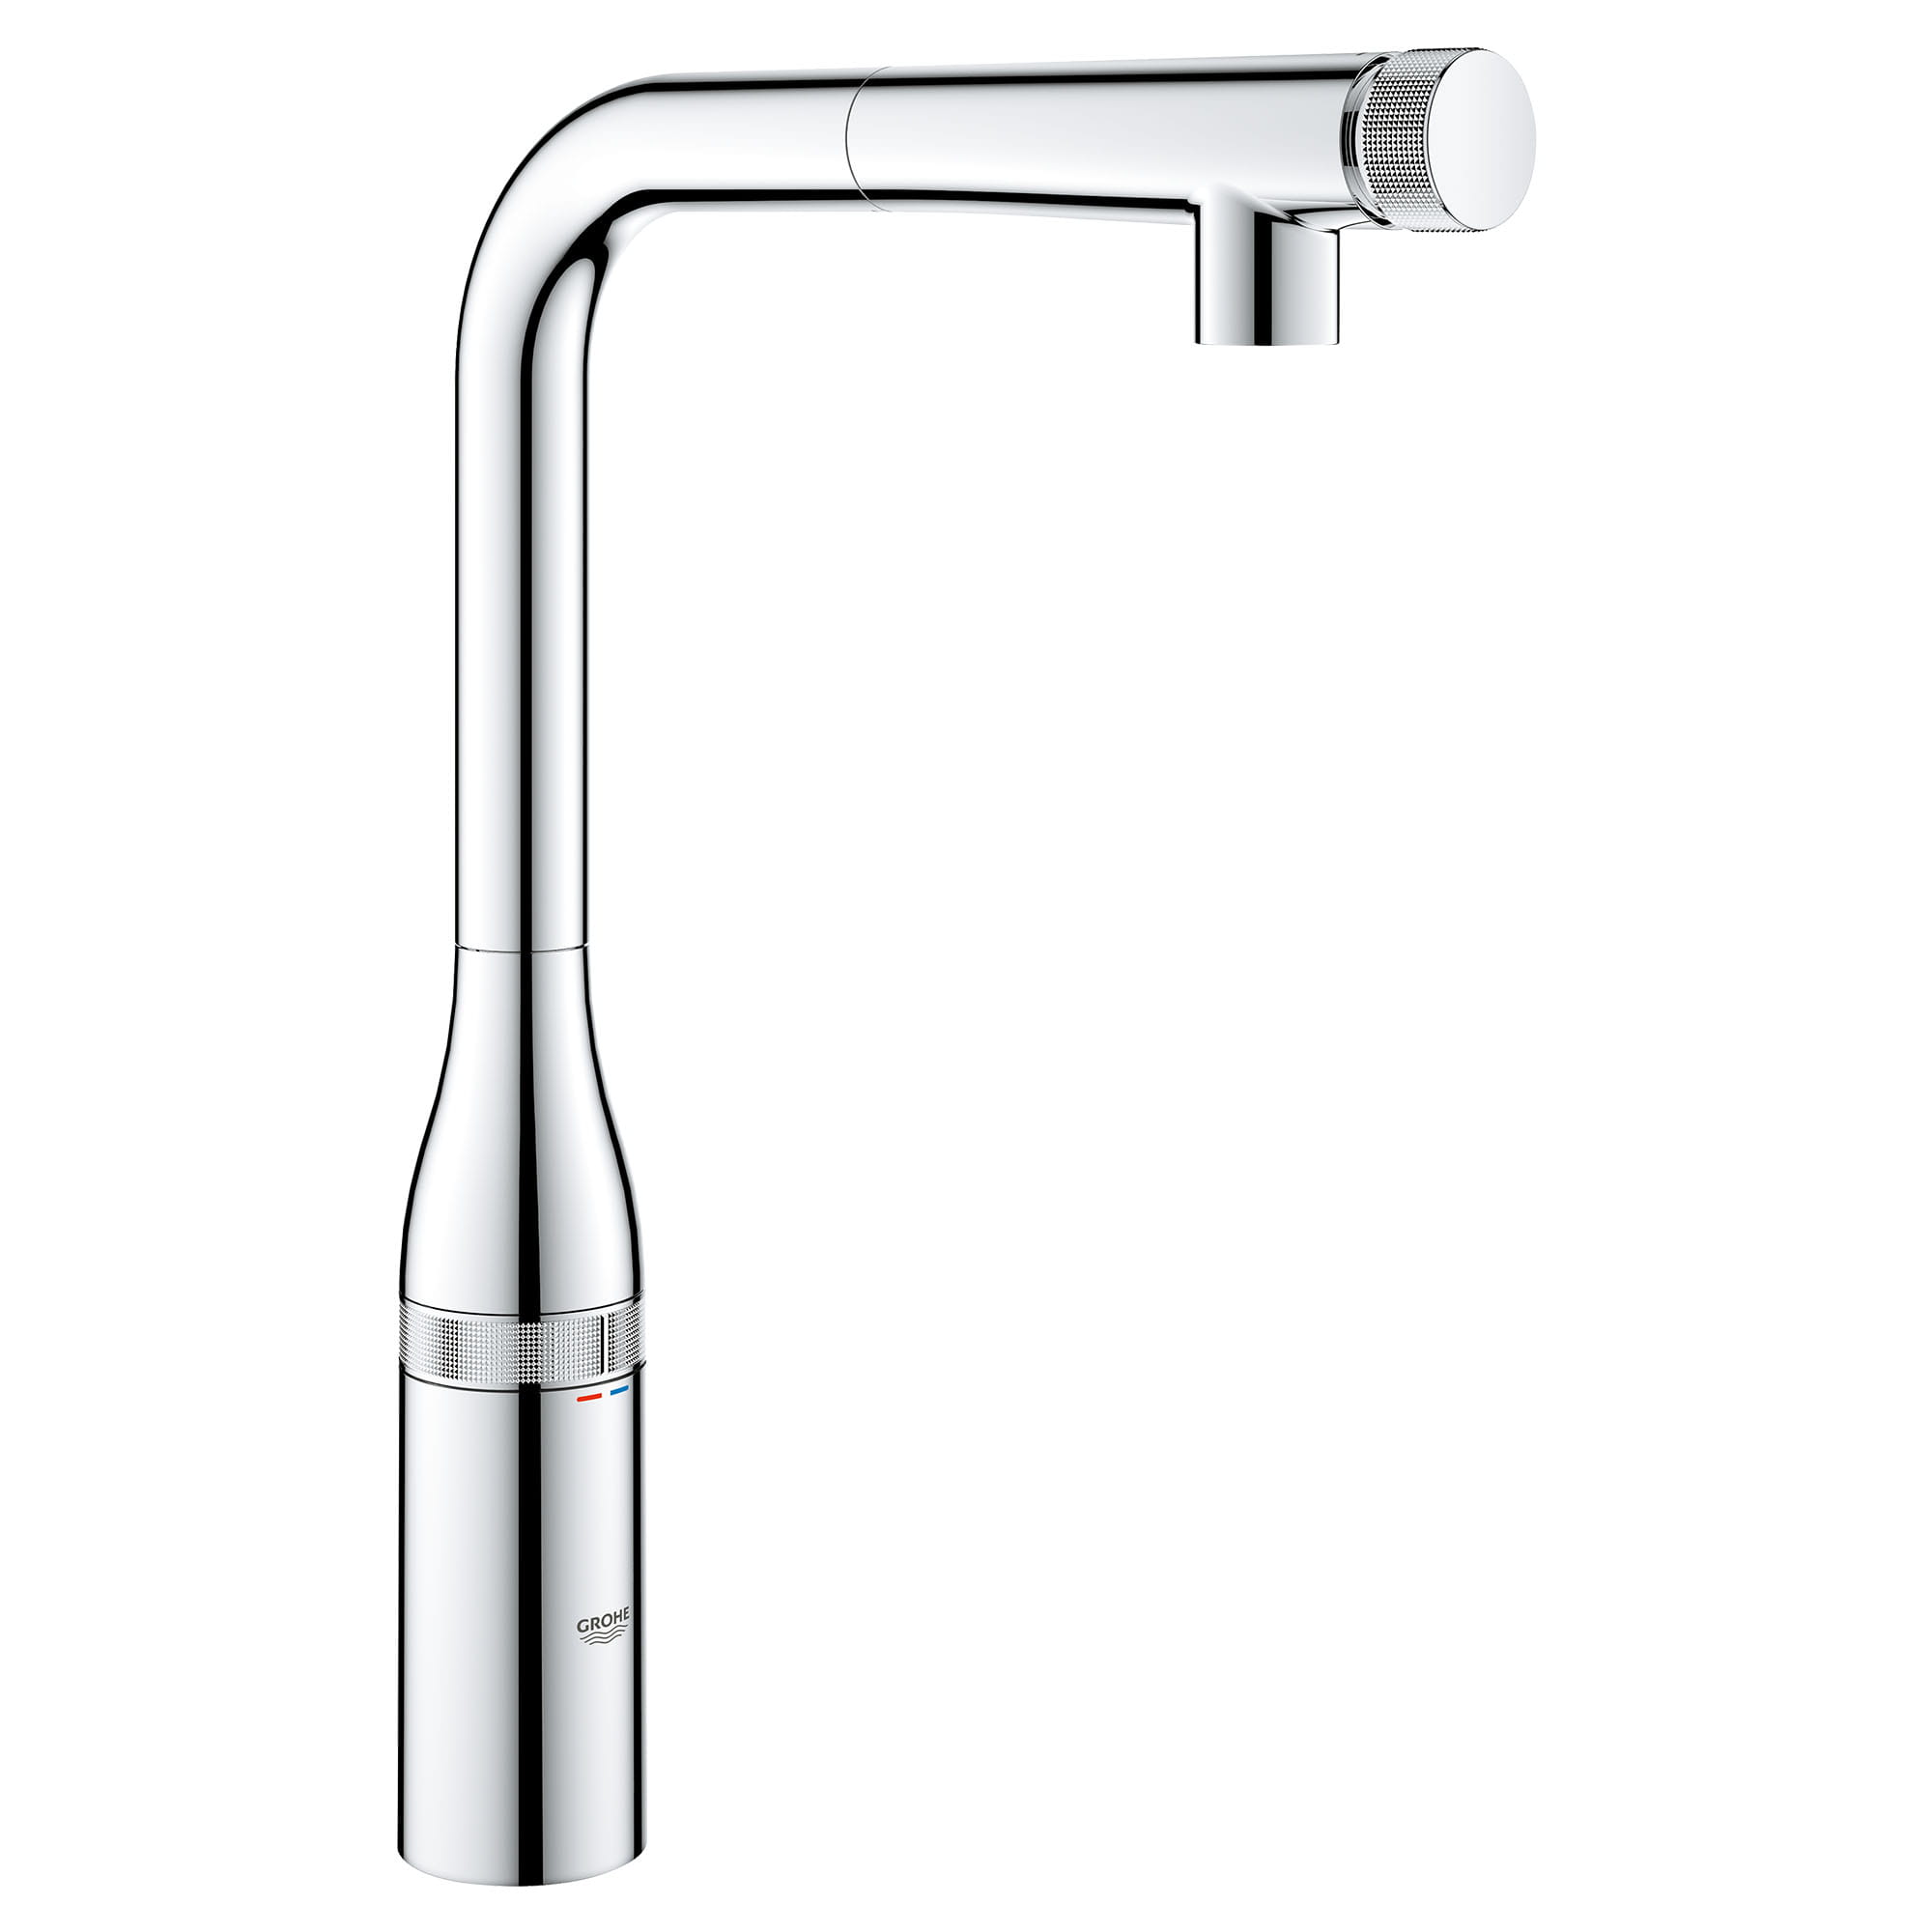 ESSENCE NEW  SMARTCONTROL PULL-OUT SINGLE SPRAY KITCHEN FAUCET 1.75 GPM-related